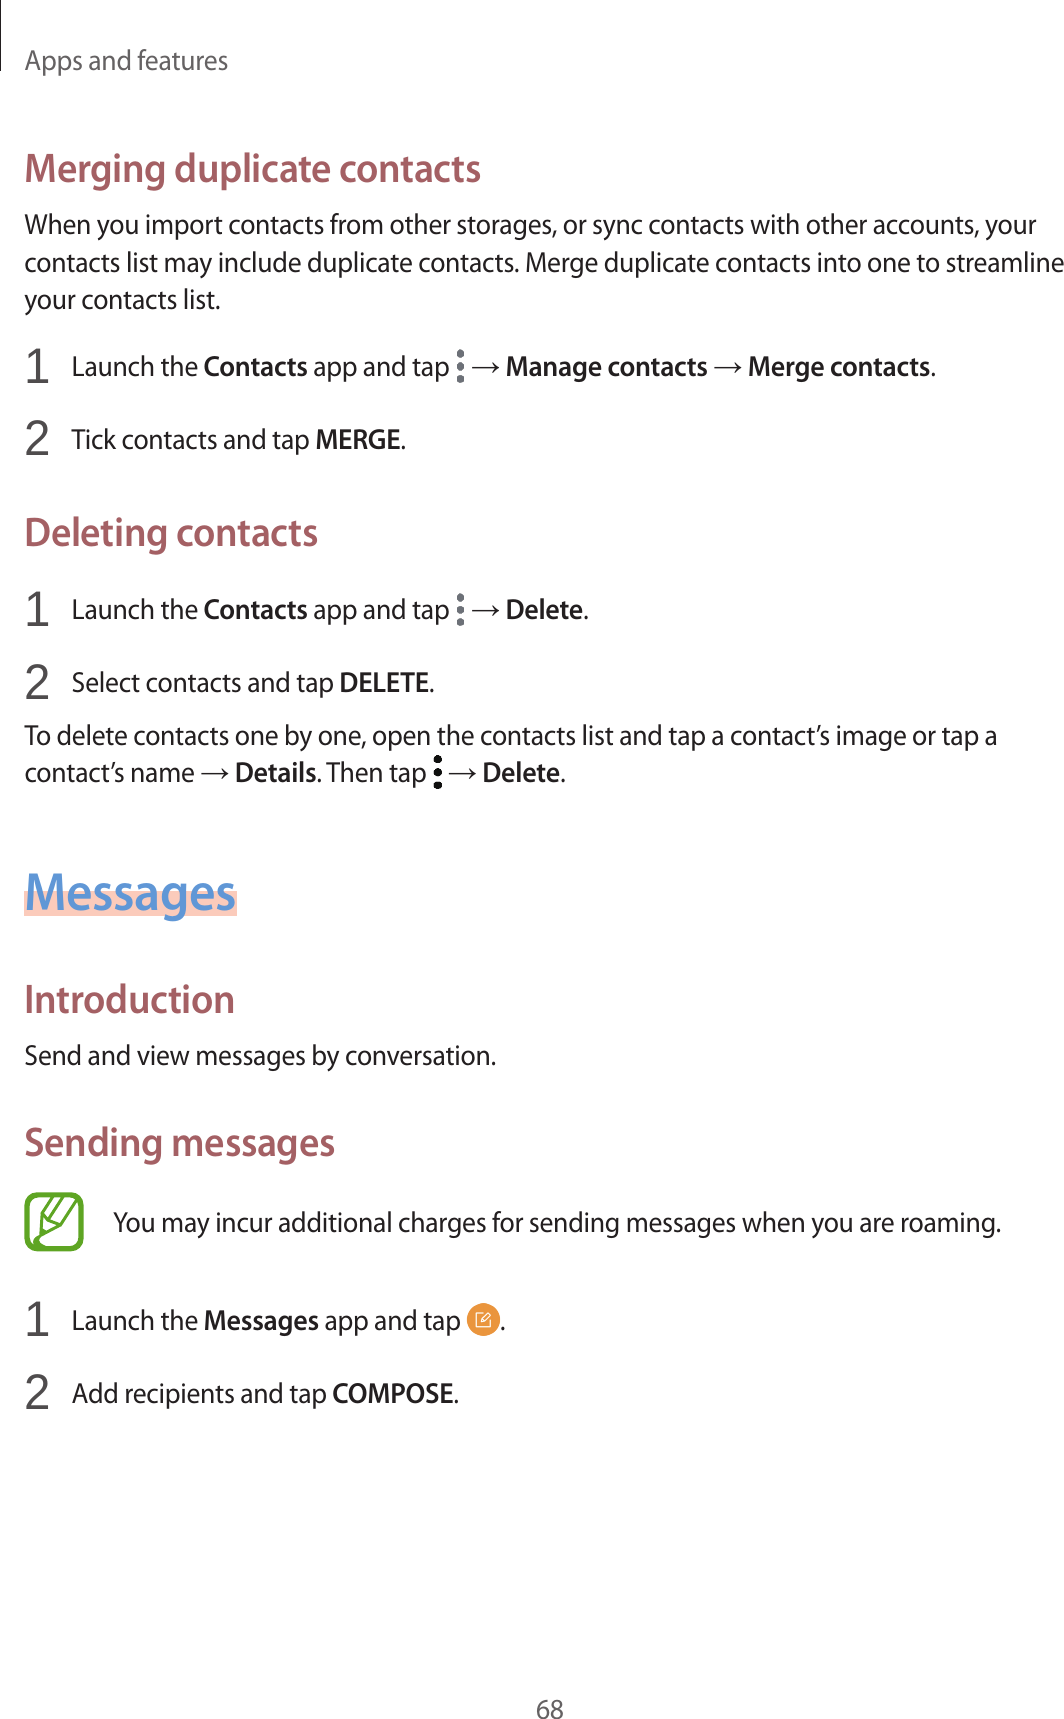 Apps and features68Merging duplicate contactsWhen you import contacts from other storages, or sync contacts with other accounts, your contacts list may include duplicate contacts. Merge duplicate contacts into one to streamline your contacts list.1  Launch the Contacts app and tap   → Manage contacts → Merge contacts.2  Tick contacts and tap MERGE.Deleting contacts1  Launch the Contacts app and tap   → Delete.2  Select contacts and tap DELETE.To delete contacts one by one, open the contacts list and tap a contact’s image or tap a contact’s name → Details. Then tap   → Delete.MessagesIntroductionSend and view messages by conversation.Sending messagesYou may incur additional charges for sending messages when you are roaming.1  Launch the Messages app and tap  .2  Add recipients and tap COMPOSE.